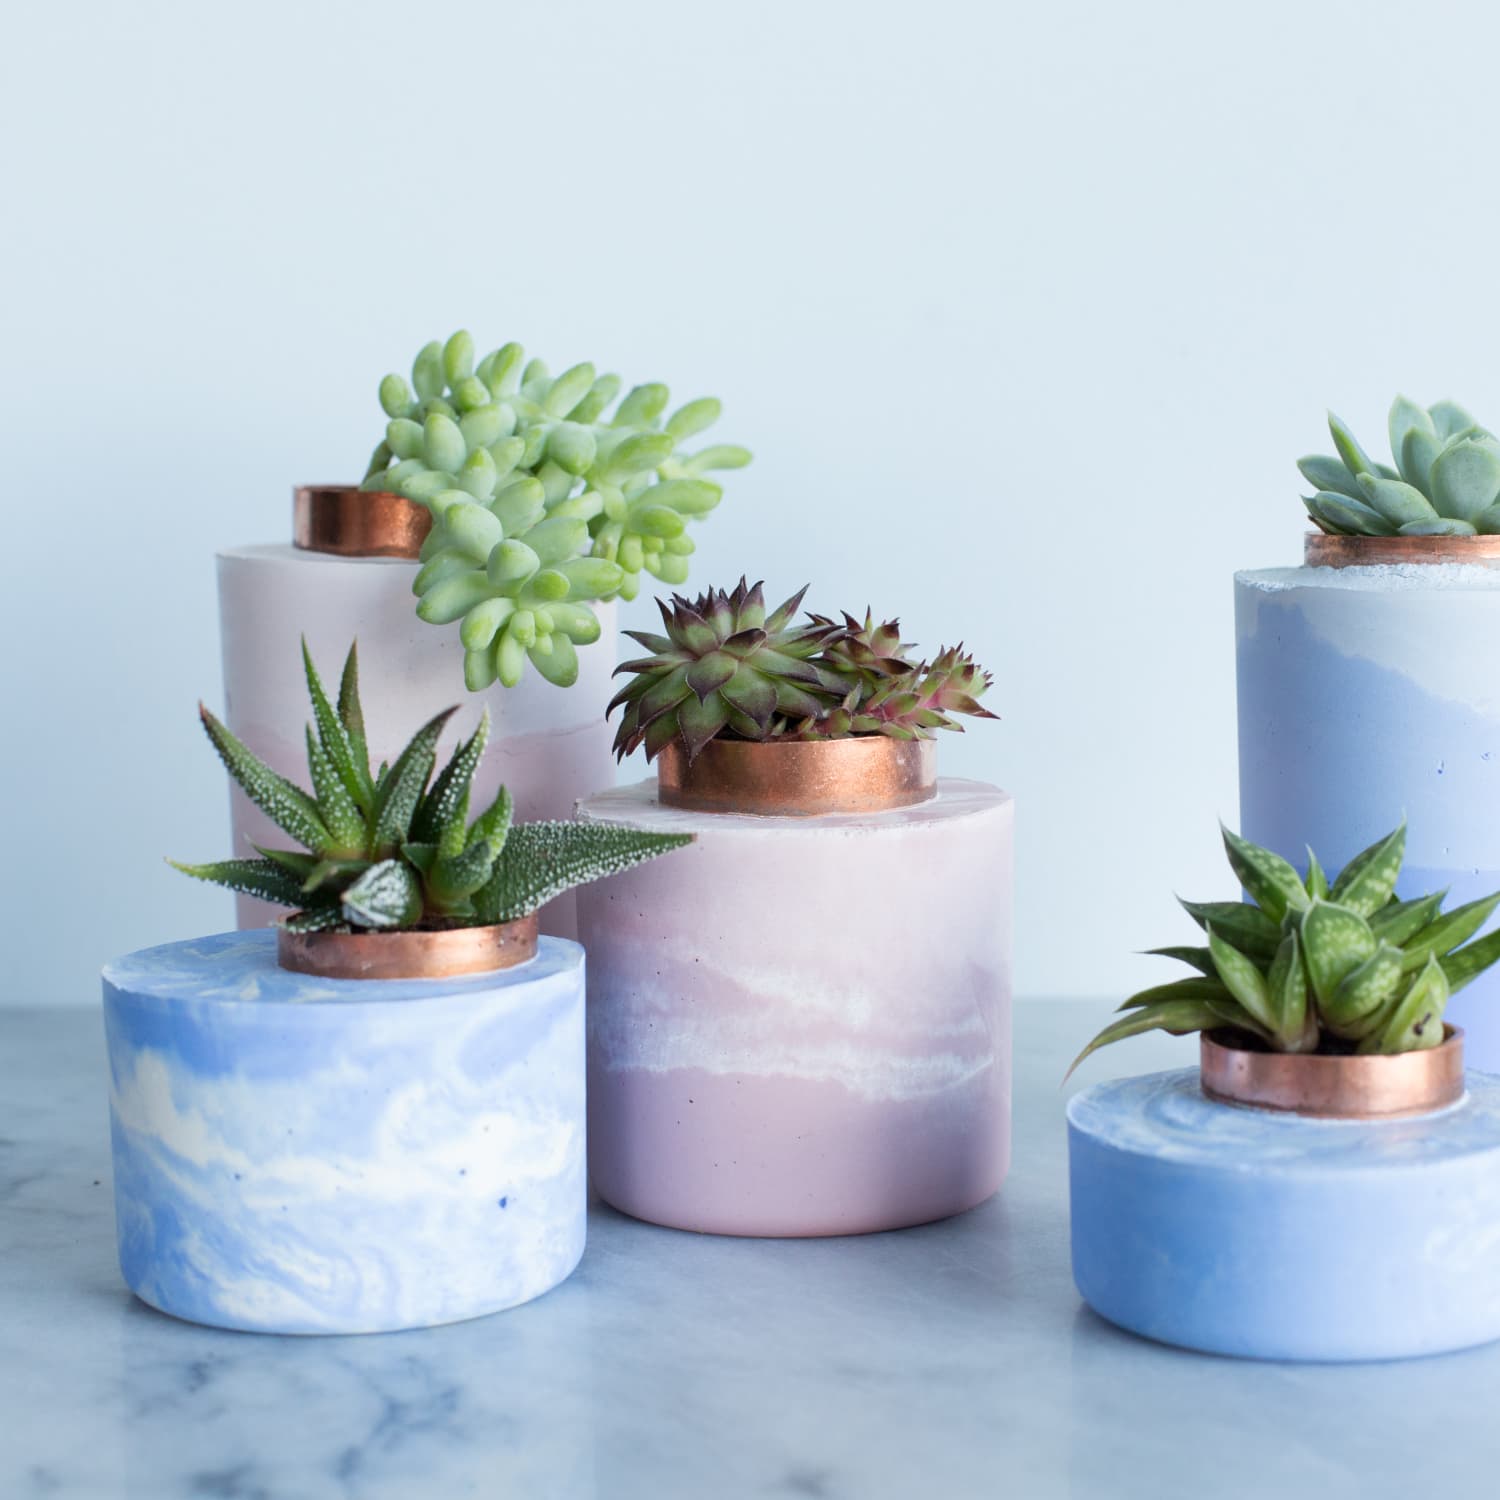 Painting Plastic Pots To Look Like Cement - The Honeycomb Home